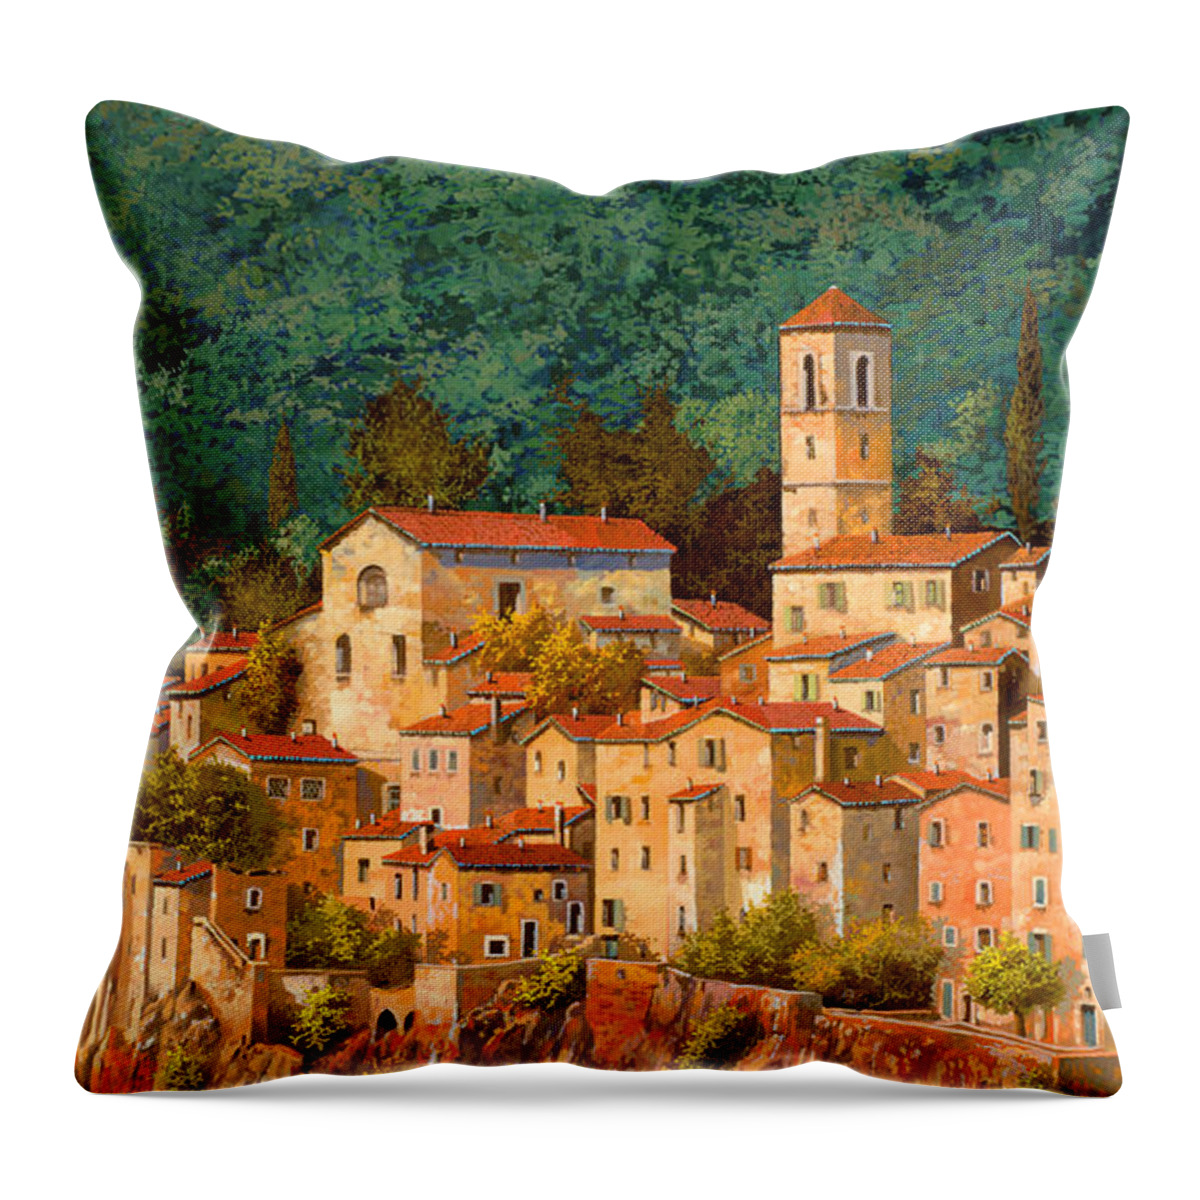 Italian Village Throw Pillow featuring the painting Sull'appennino by Guido Borelli